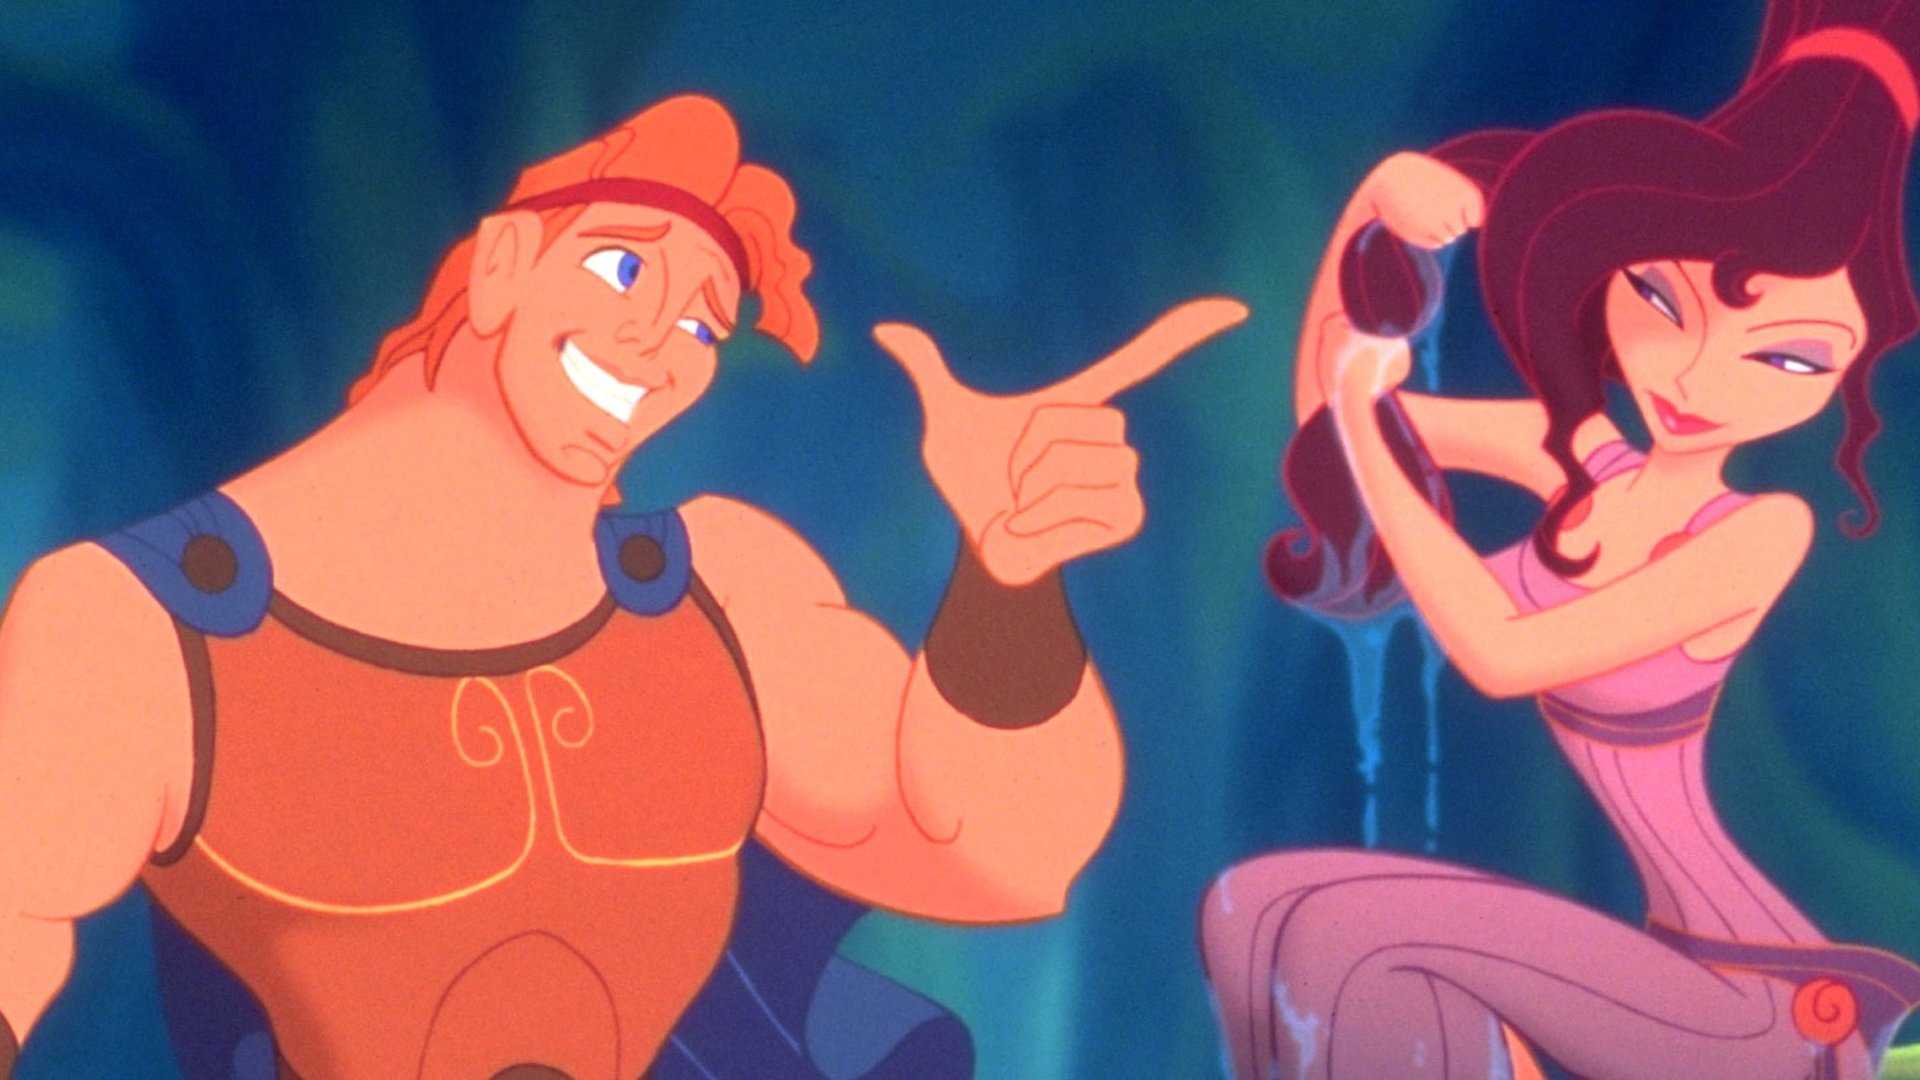 Avengers: End Game director's the Russo Brothers tease their live-action reboot of Disney's Hercules